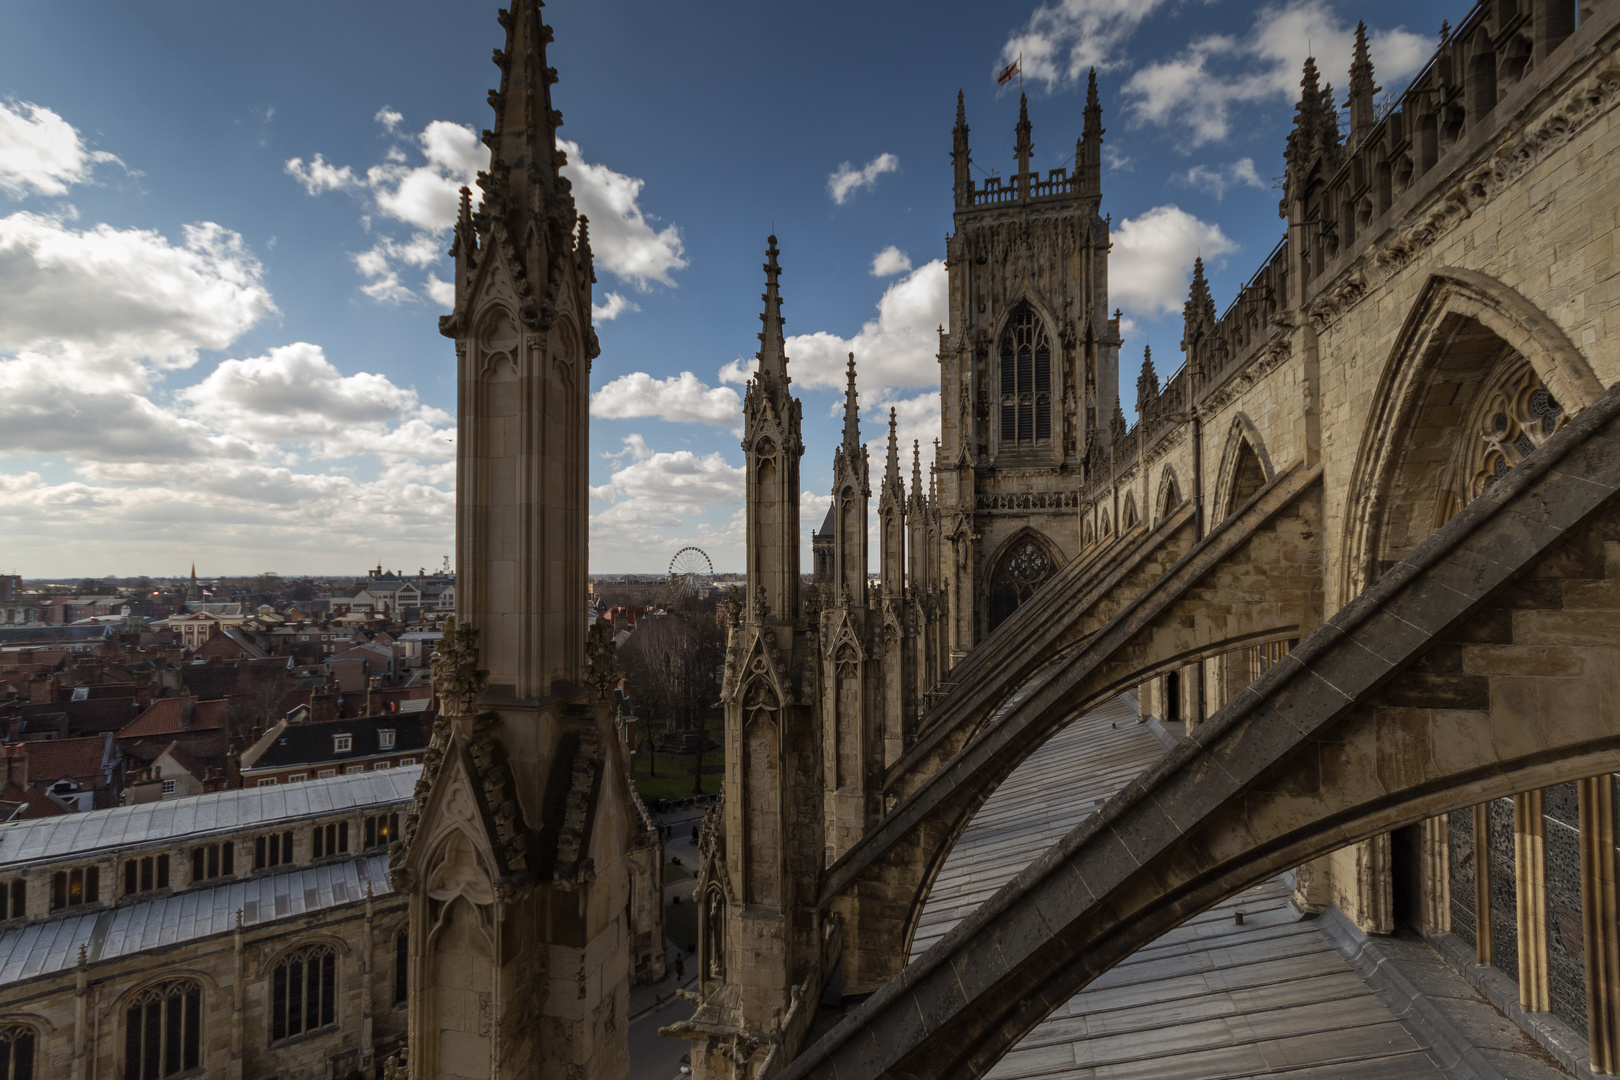 From the roof of York Minster